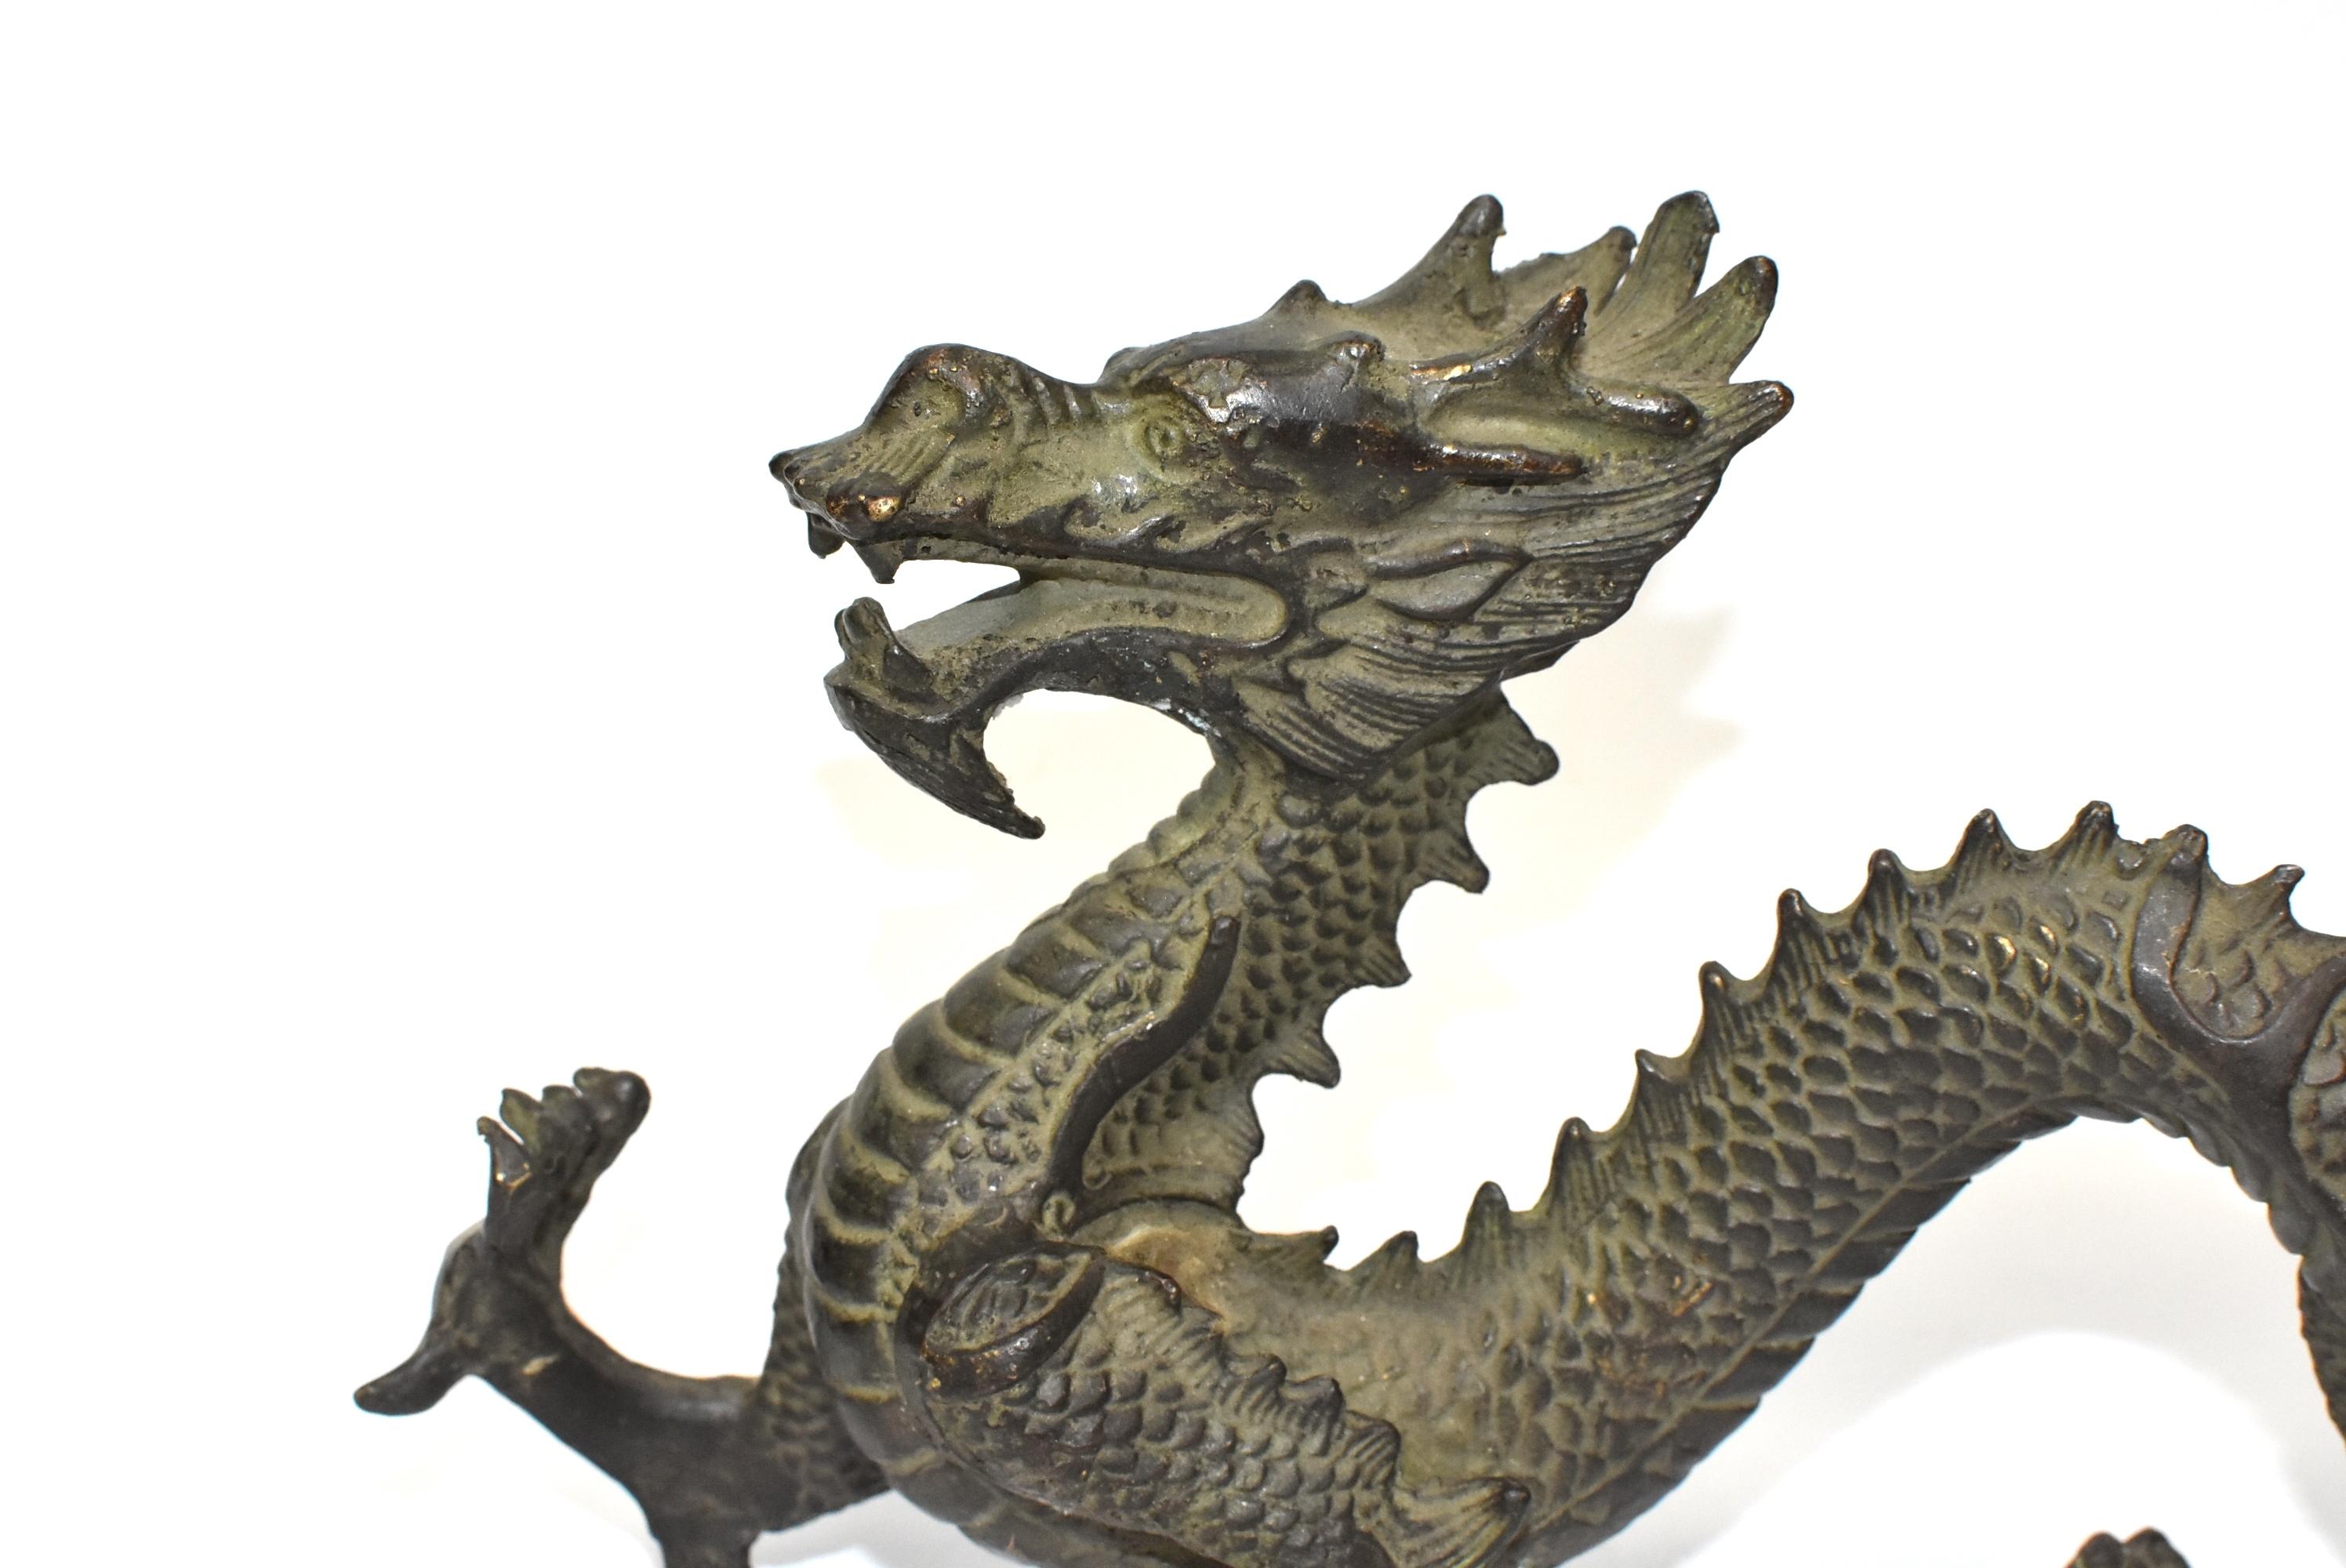 A beautiful bronze dragon with fantastic depiction of horns, scales and paws. The dragon is the sign of Chinese Emperor, it symbolizes power and prosperity. A wonderful piece as a gift, a display or a feng shui tool.